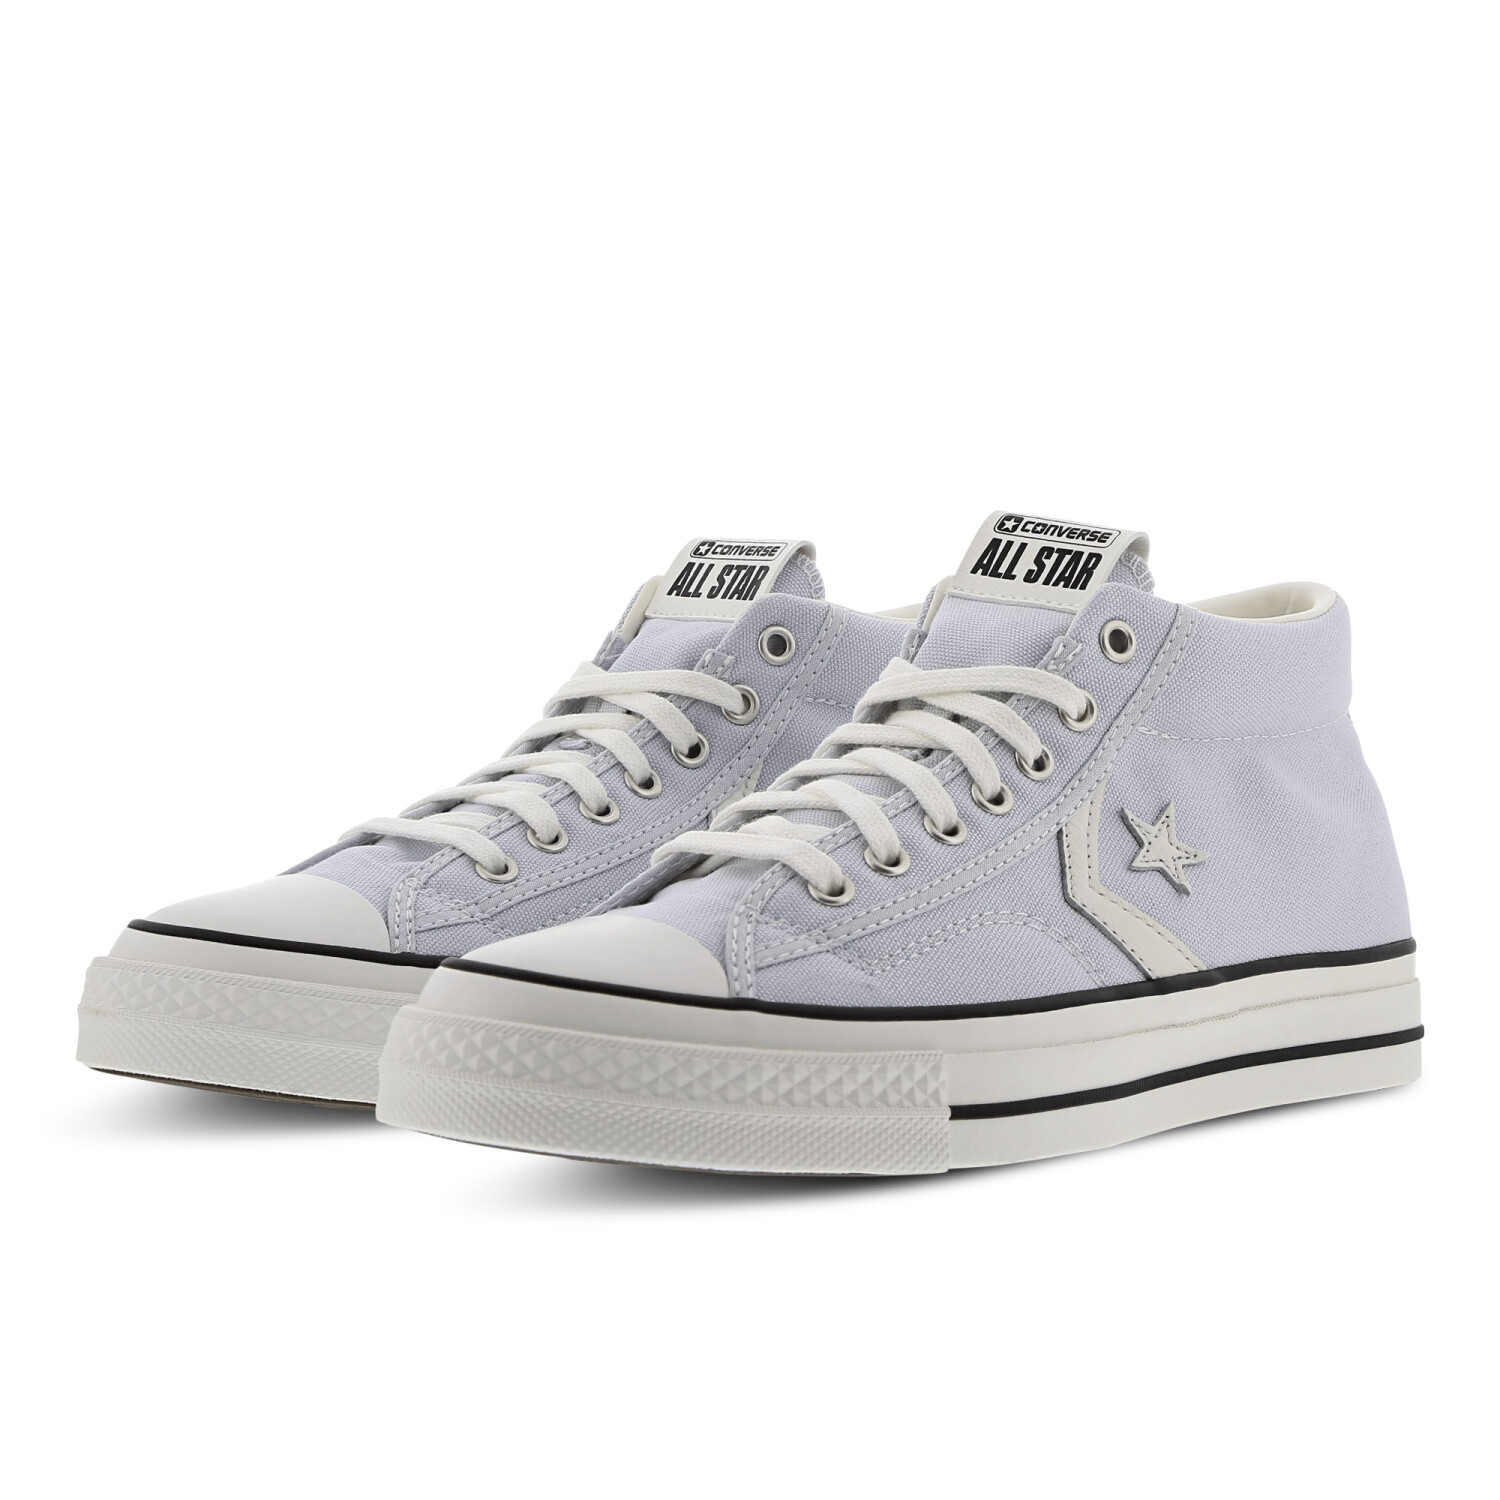 Converse Star Player 76 Mid ghosted/vintage white/black ab 44,99 ...